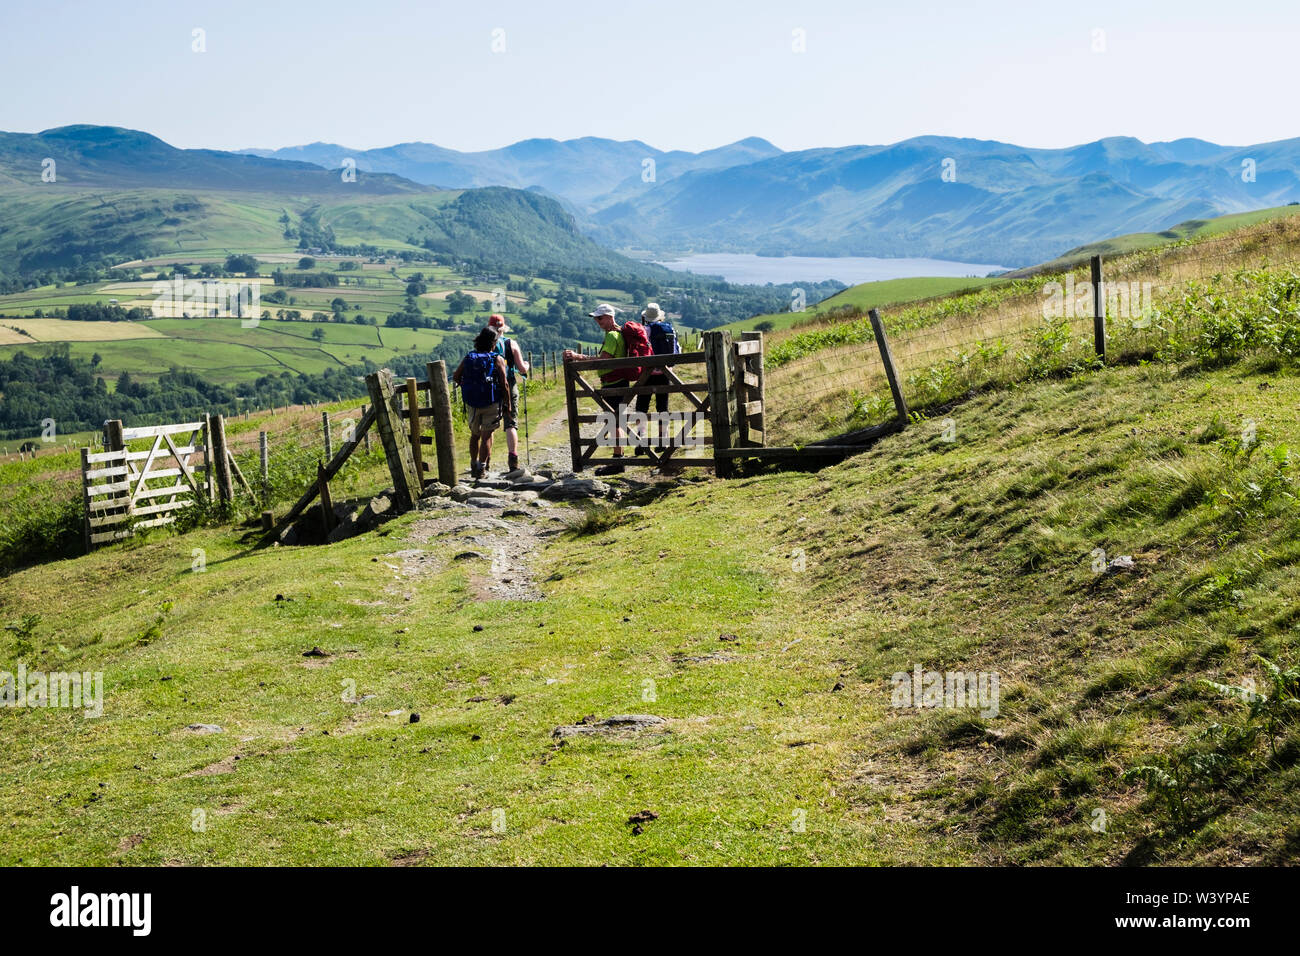 Hikers hiking and closing a gate on Cumbria Way trail on Lonscale Fell hillside in Lake District National Park. Keswick, Cumbria, England, UK, Britain Stock Photo